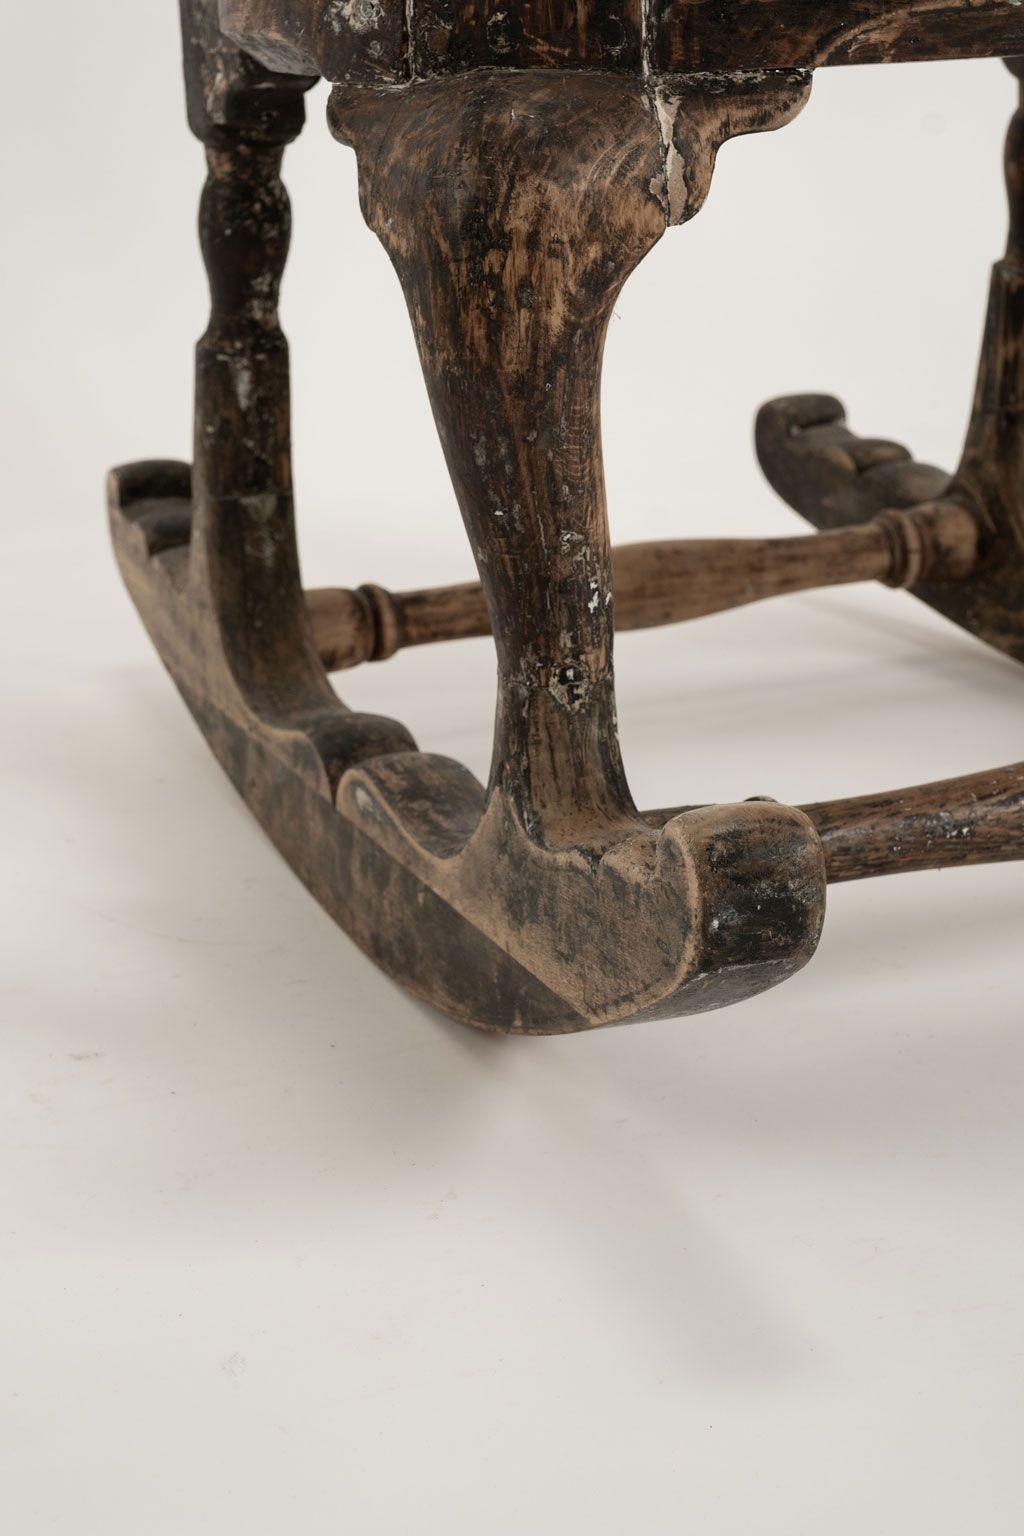 18th century Swedish rococo rocking chair circa 1730-1769. Beautiful, unusual rocking chair from Sweden. Decoration and cabriole legs hand-carved in Swedish rococo period and style. Turned stretcher and shaped pierced splat back. Early painted